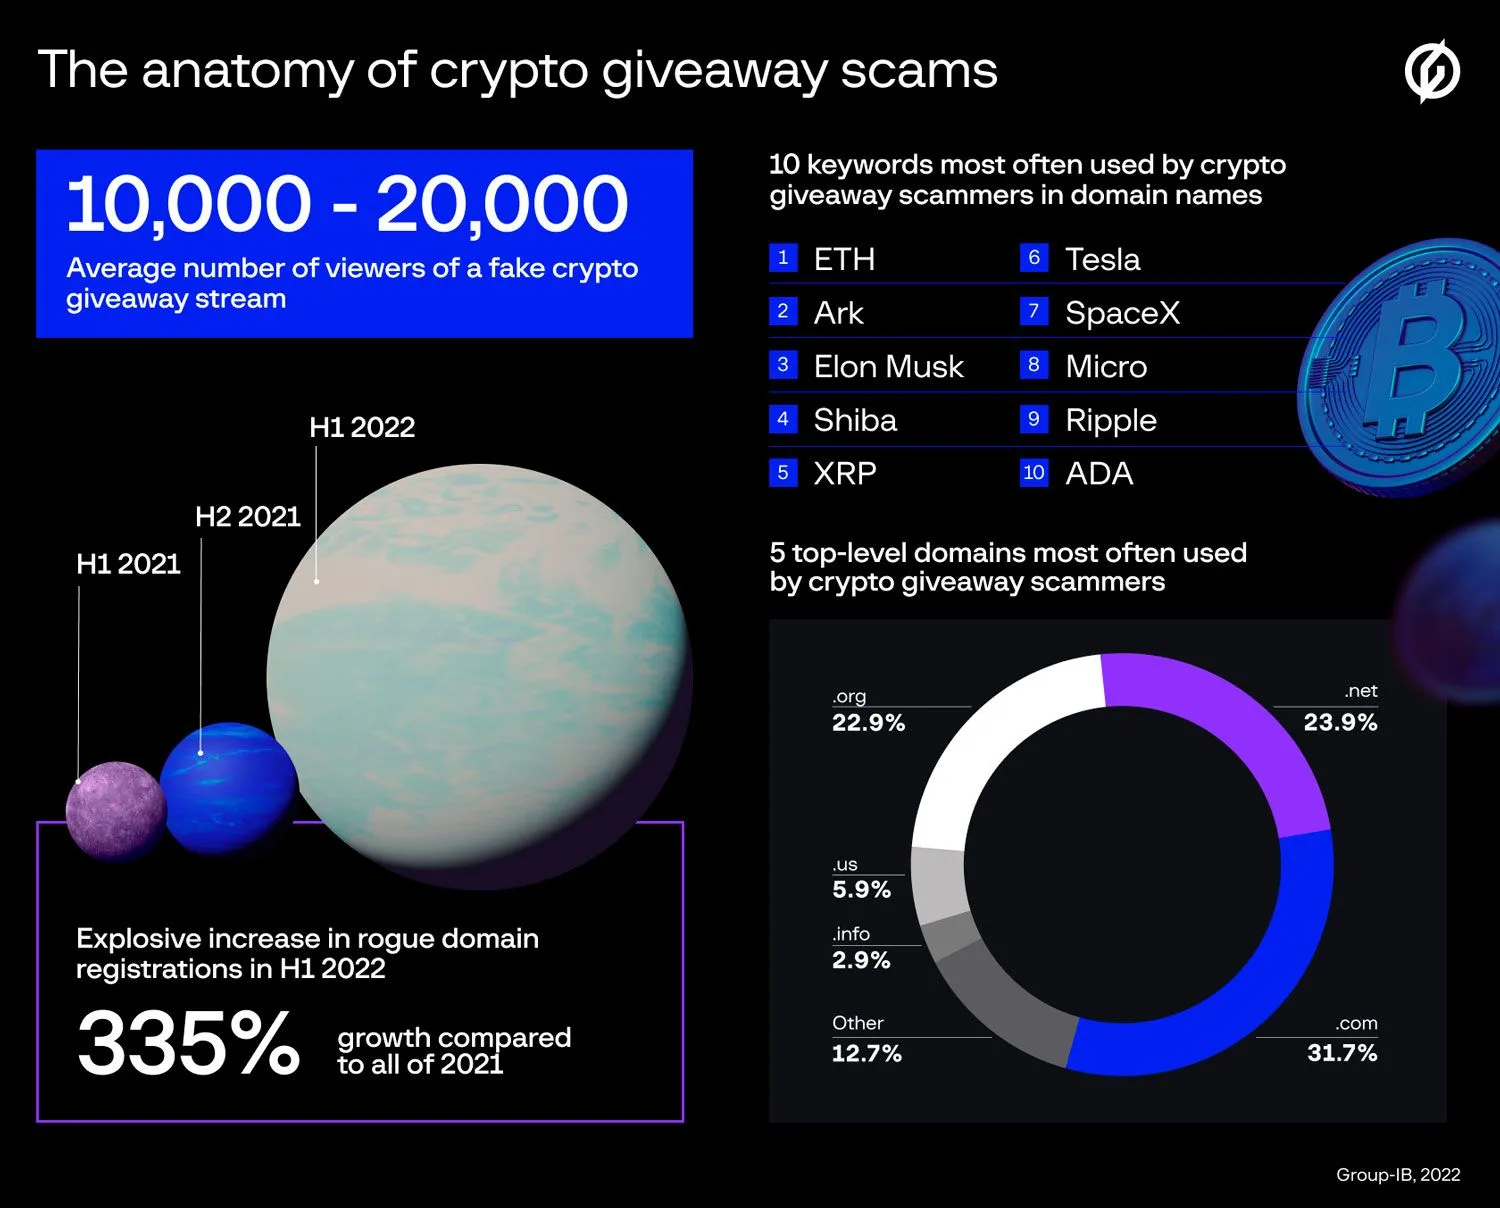 TLDs and keywords used in crypto giveaway scams